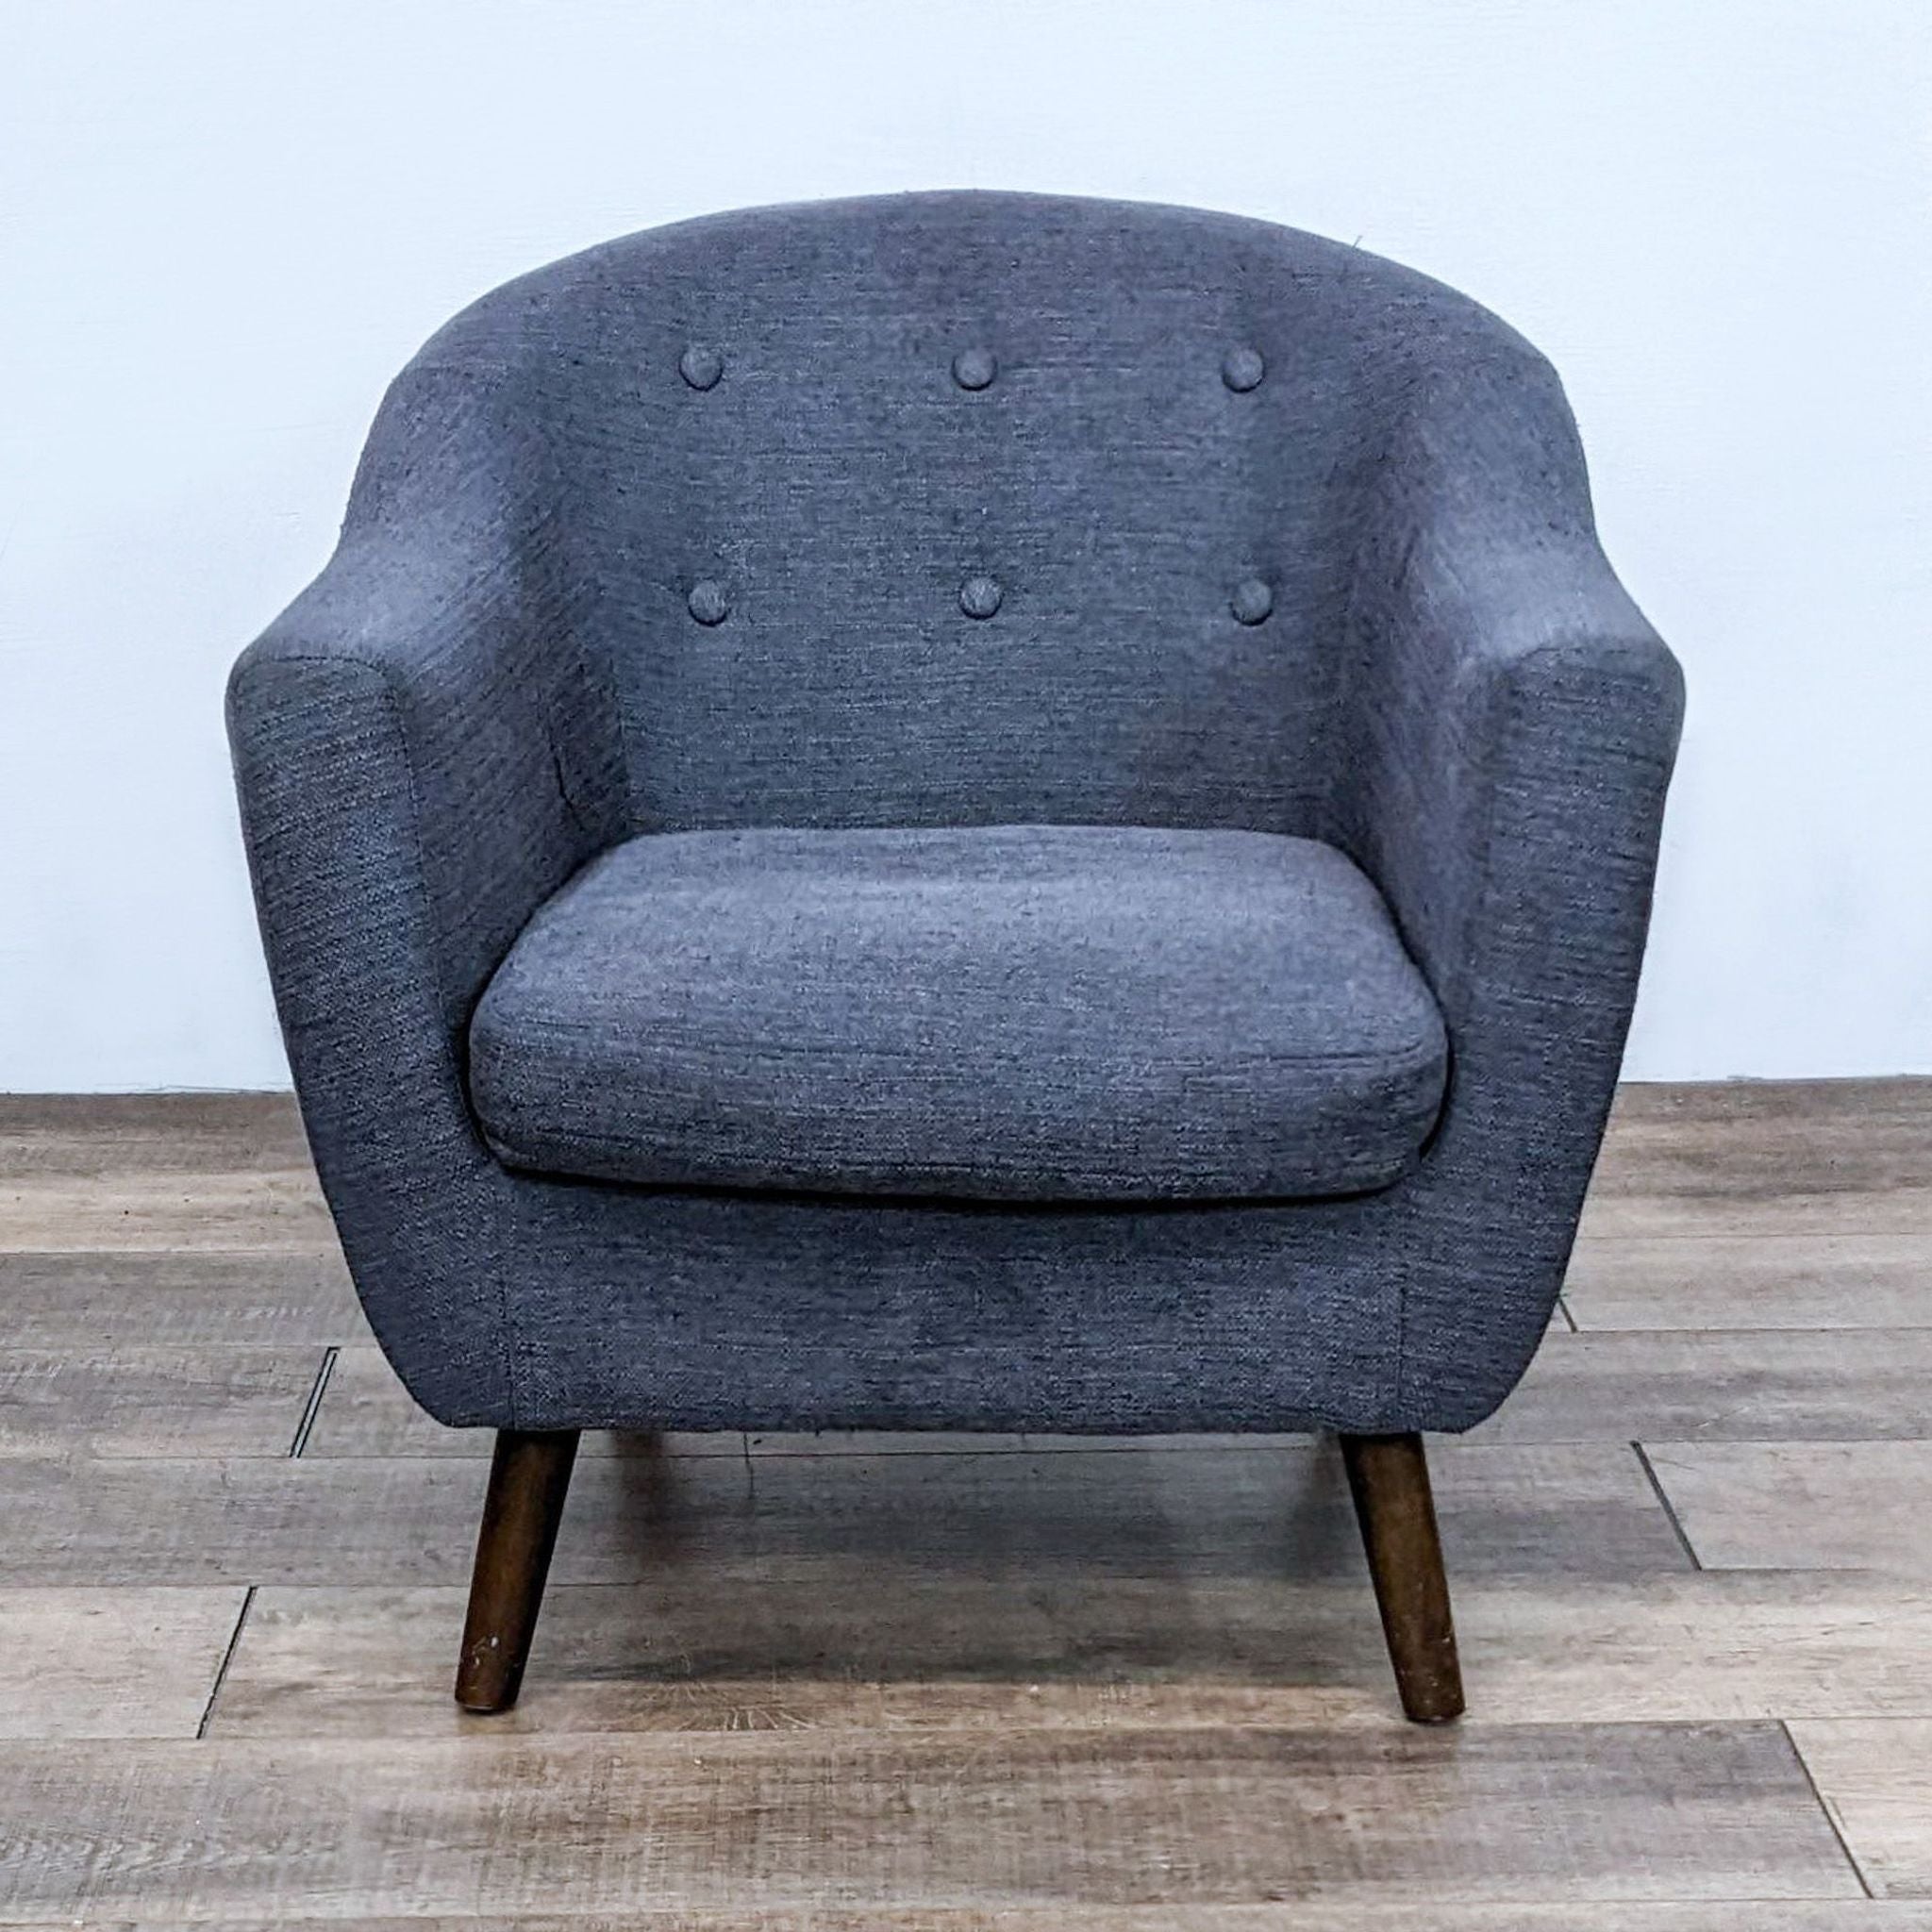 Reperch mid-century modern chair with stylish woven fabric, button-tufted back, and solid wood legs.